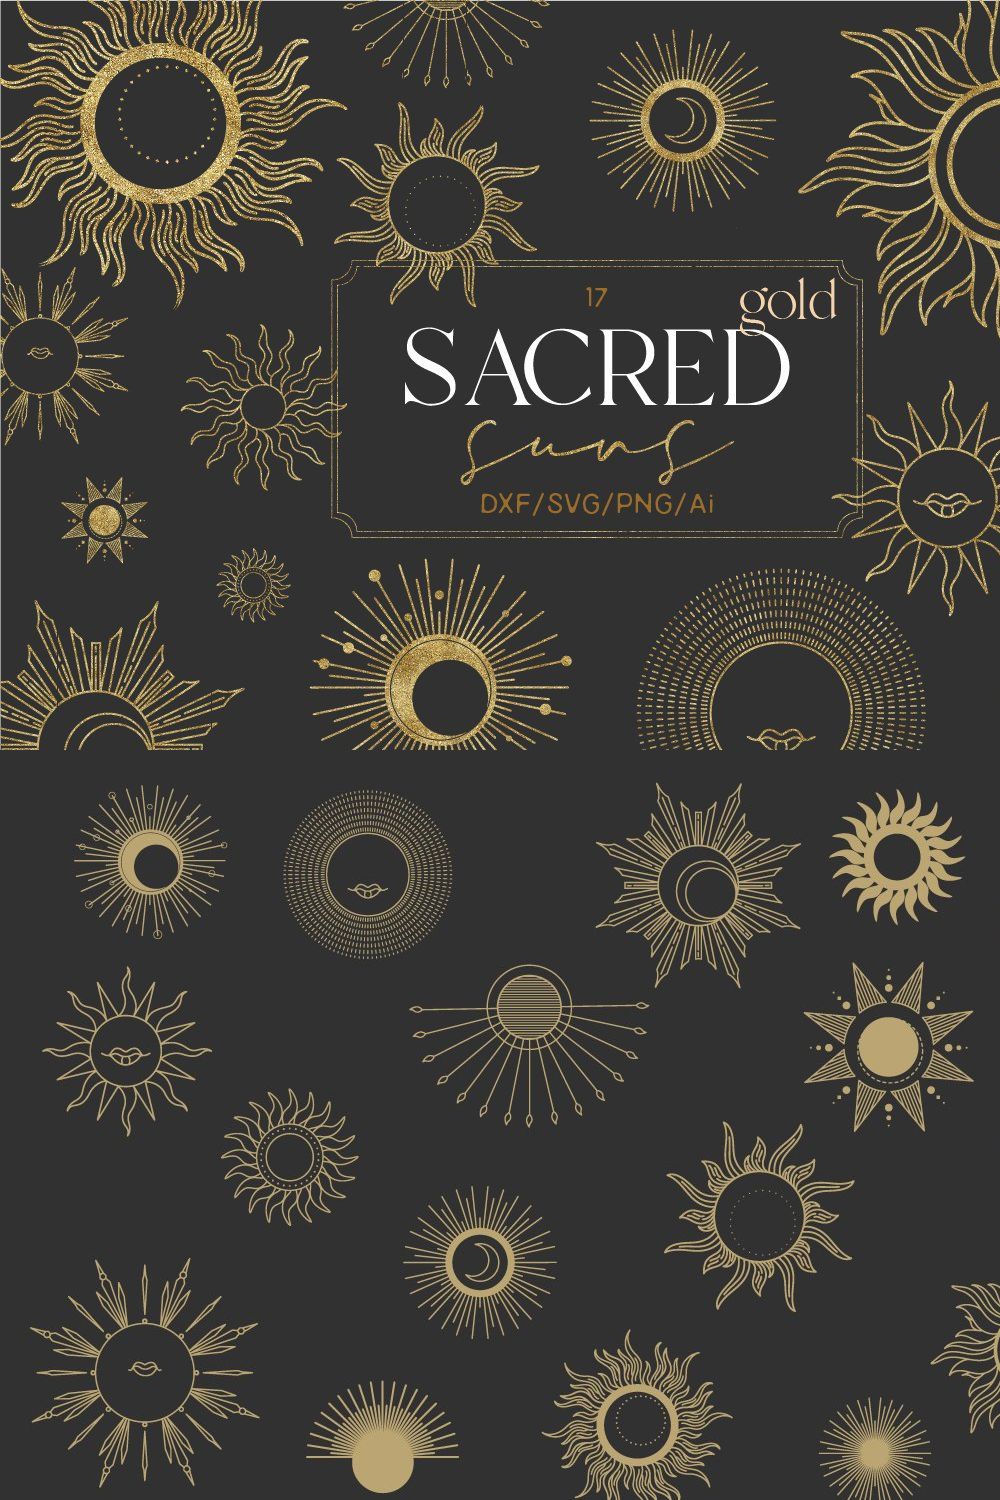 Sacred gold suns pinterest preview image.